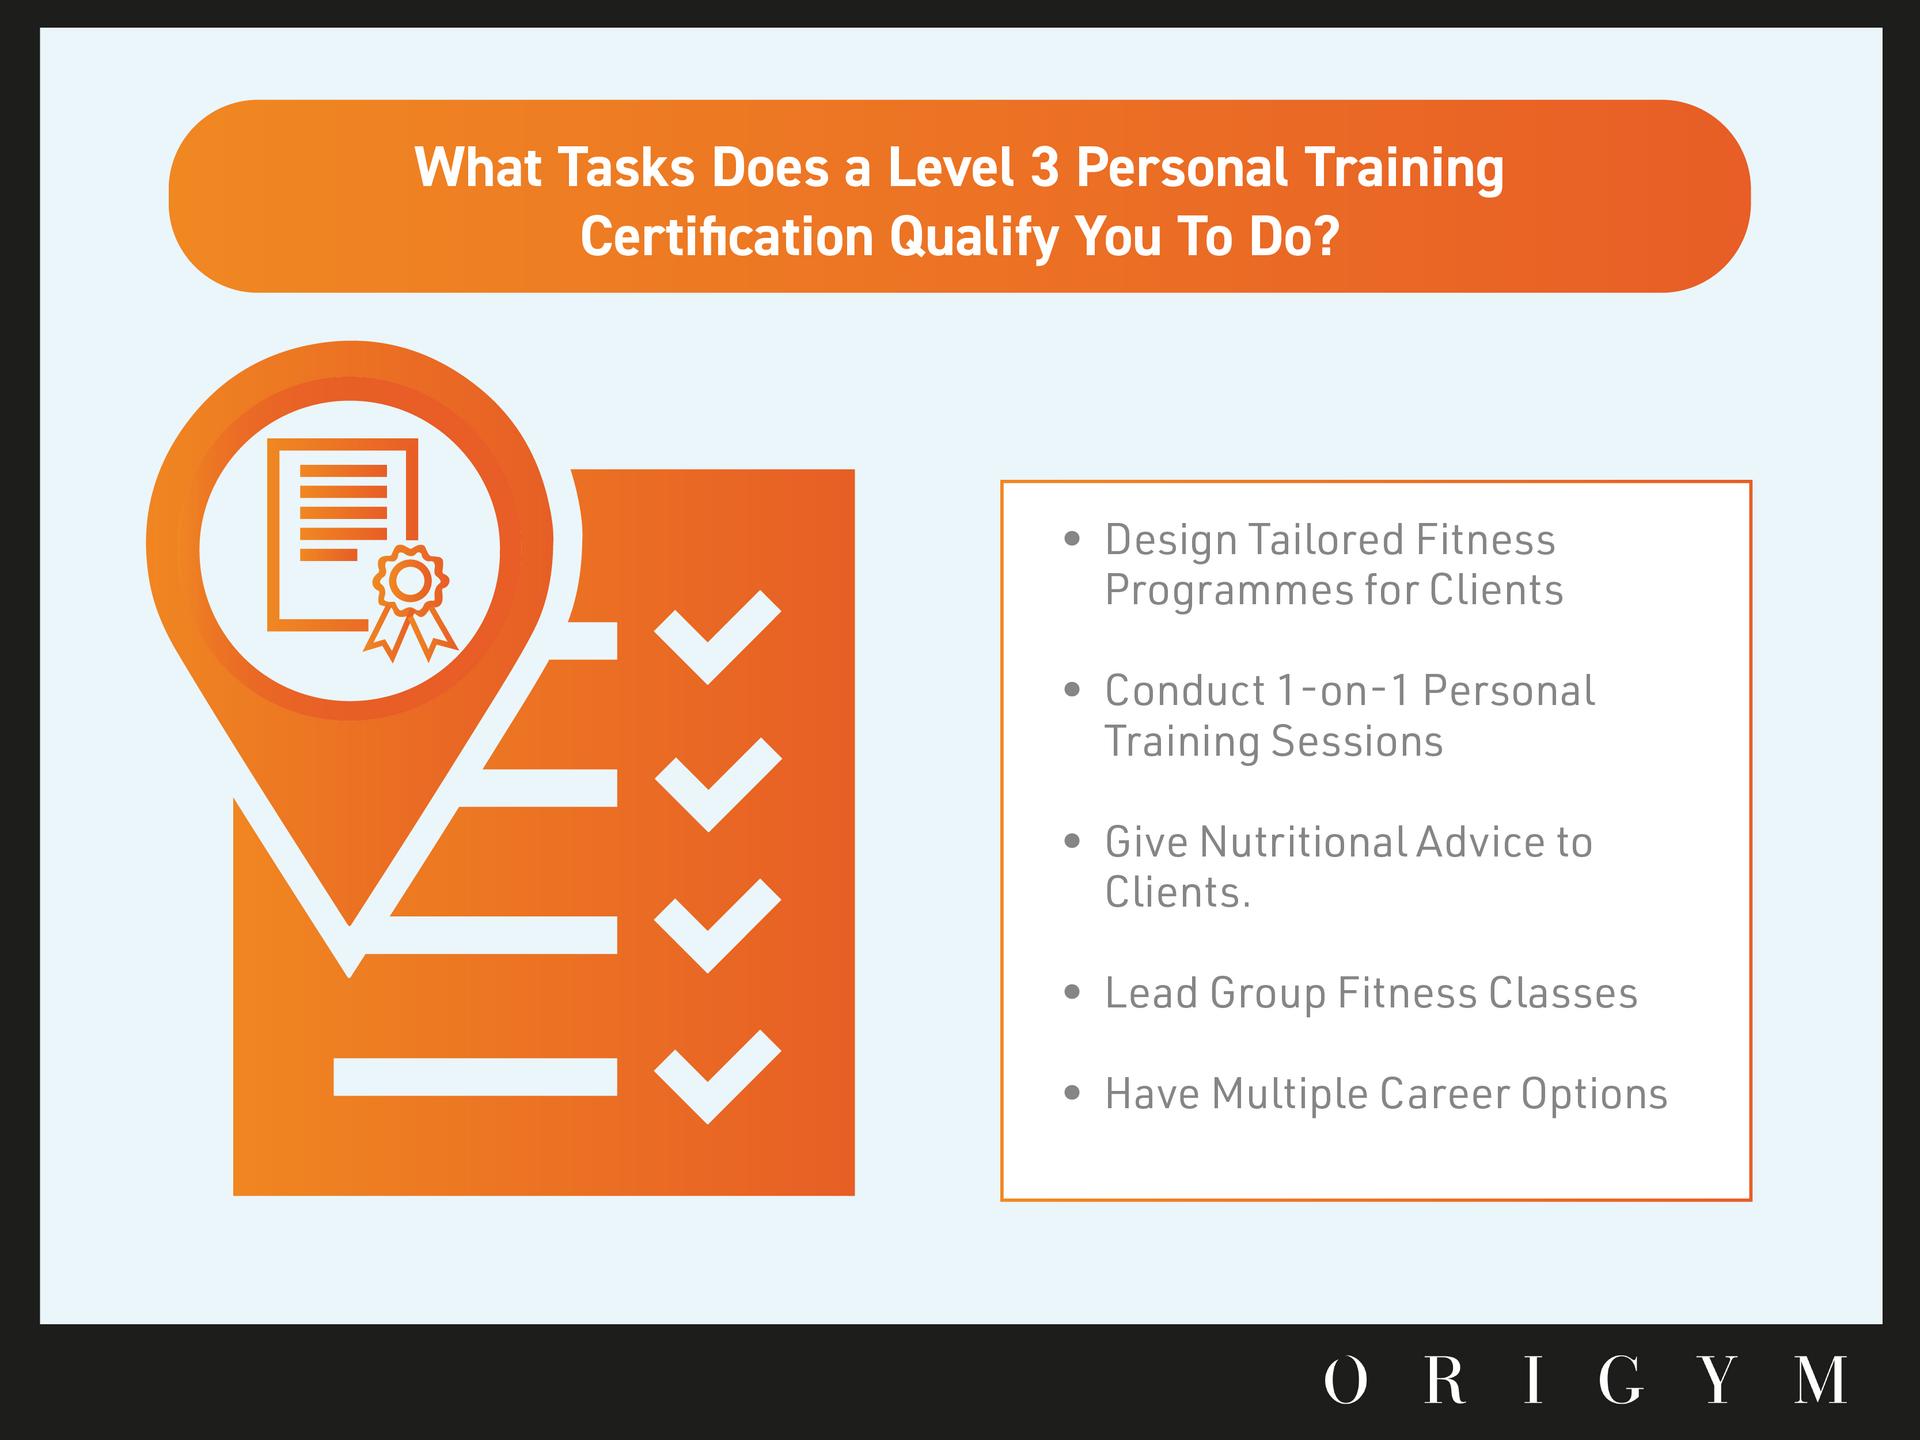 What Tasks Does a Level 3 Personal Training Certification Qualify You To Do Infographic